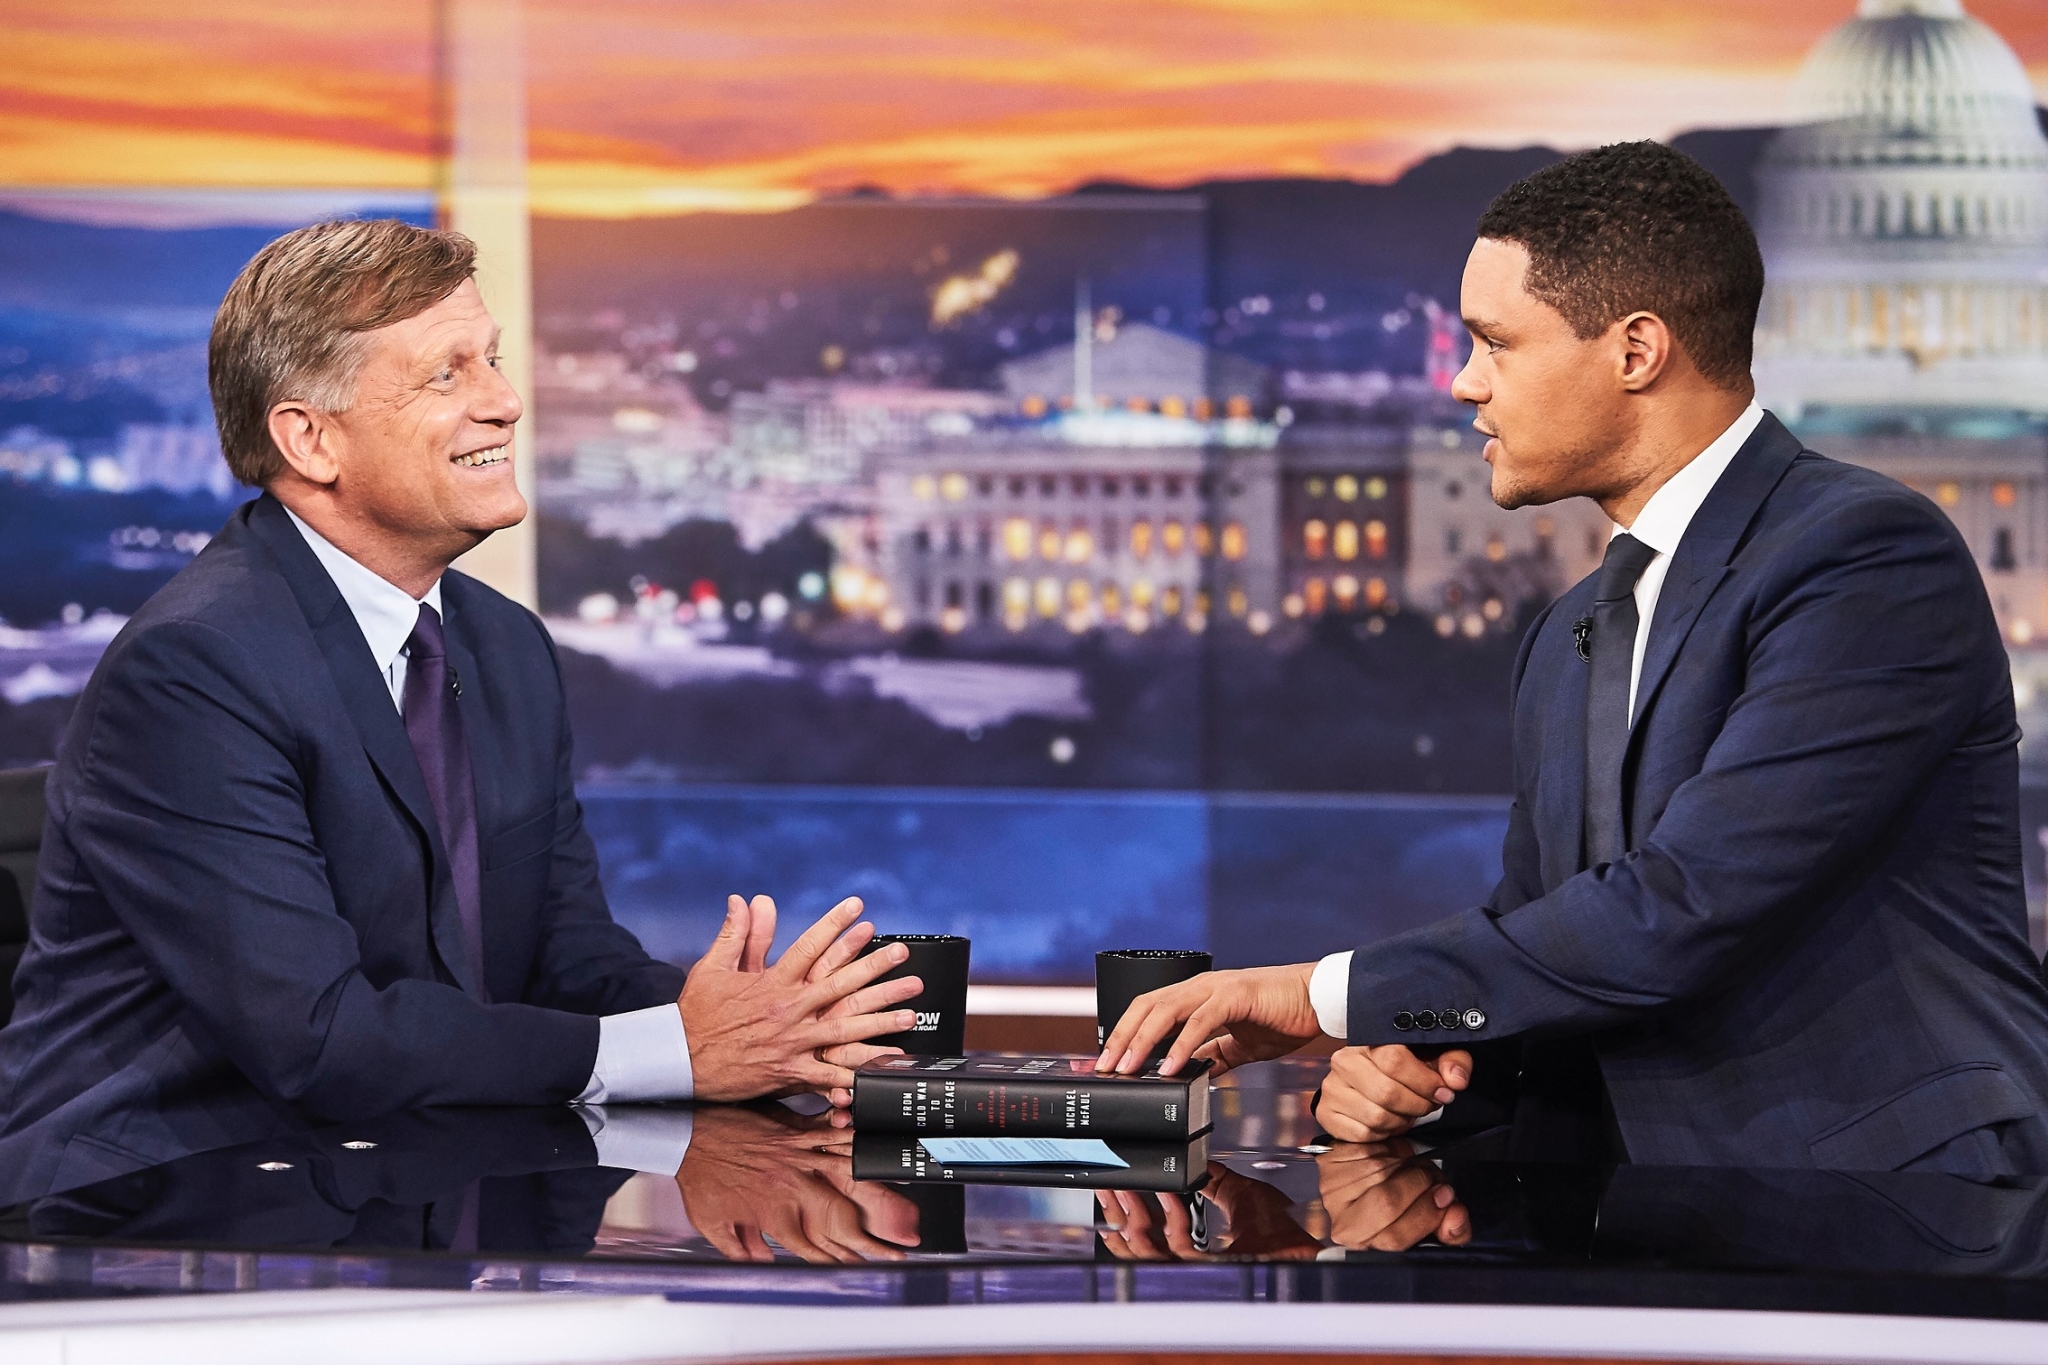 Presenting "From Cold War to Hot Peace" at The Daily Show with Trevor Noah